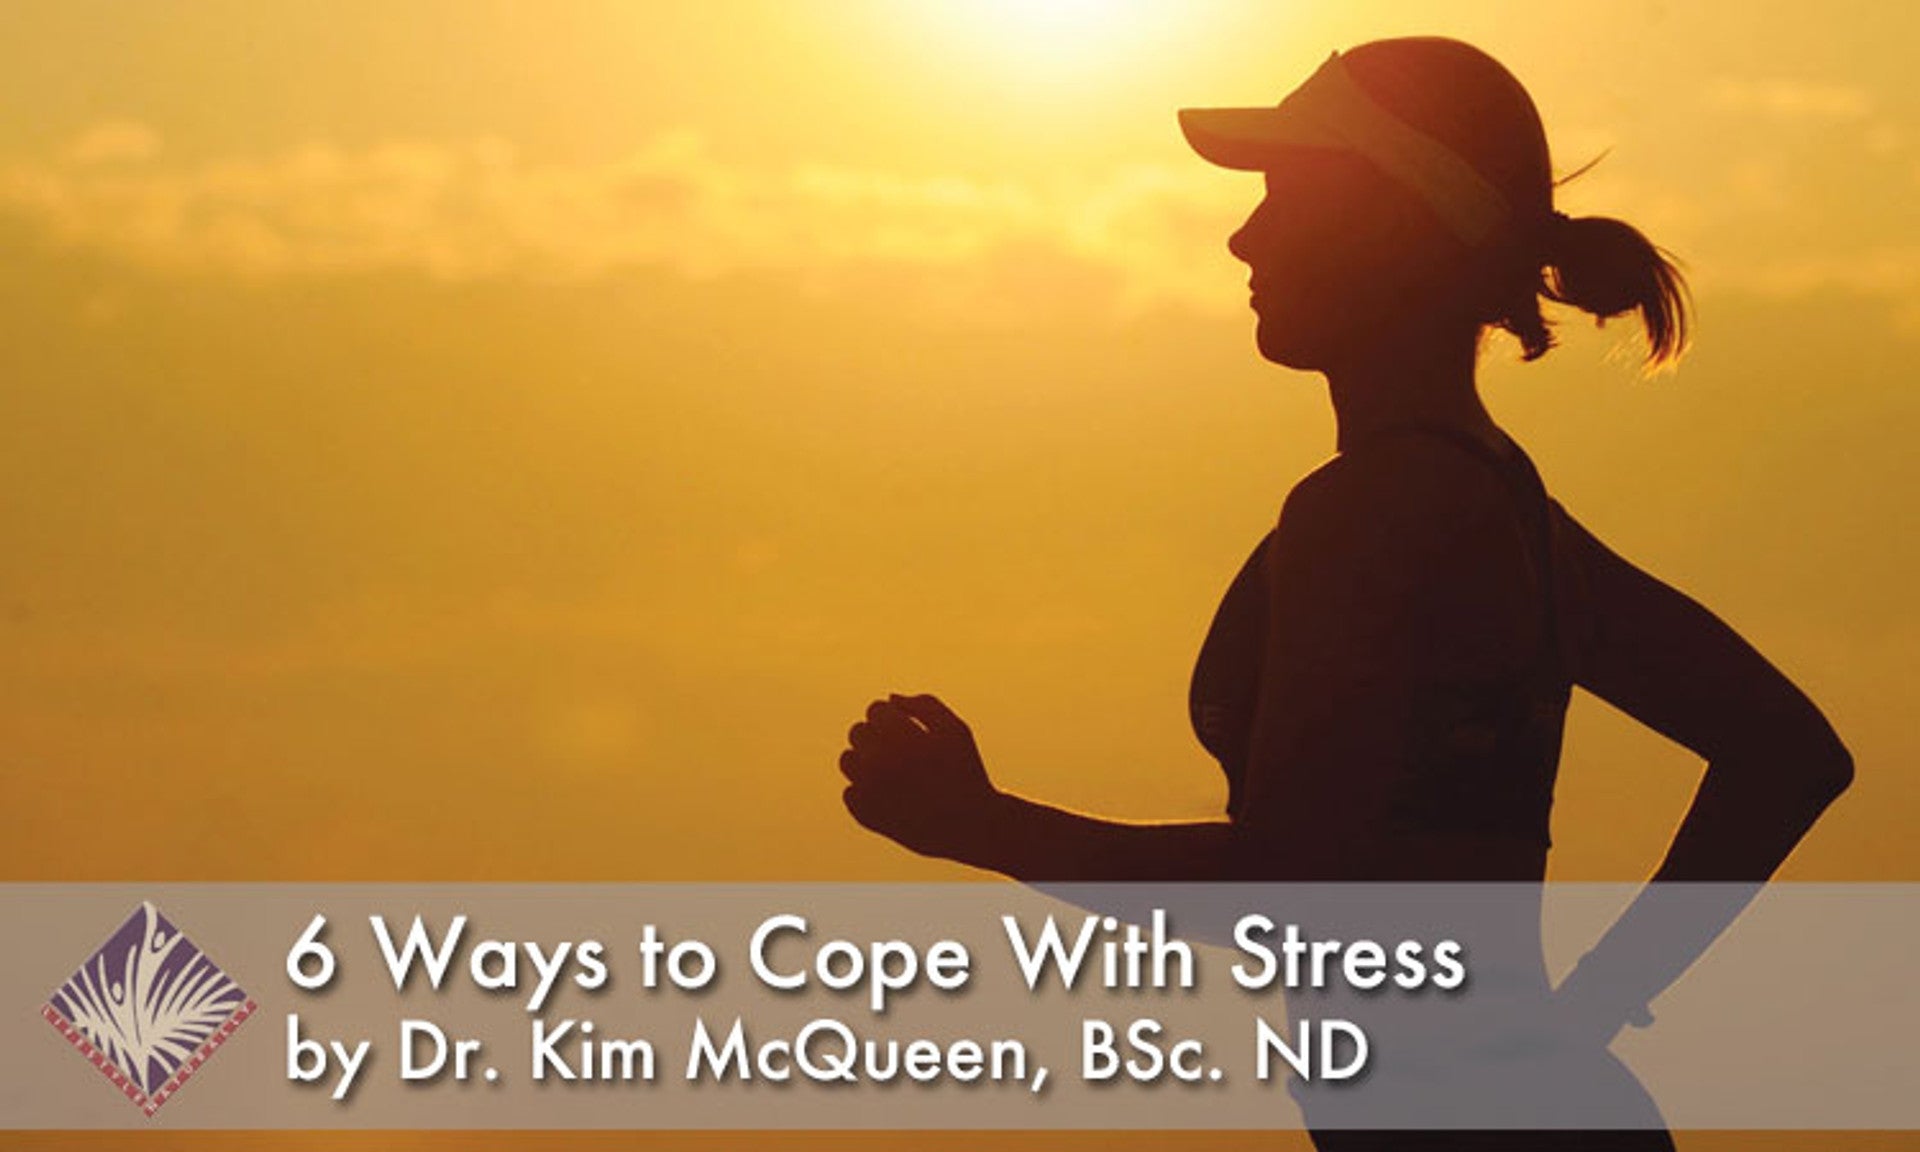 6 Ways to Cope With Stress